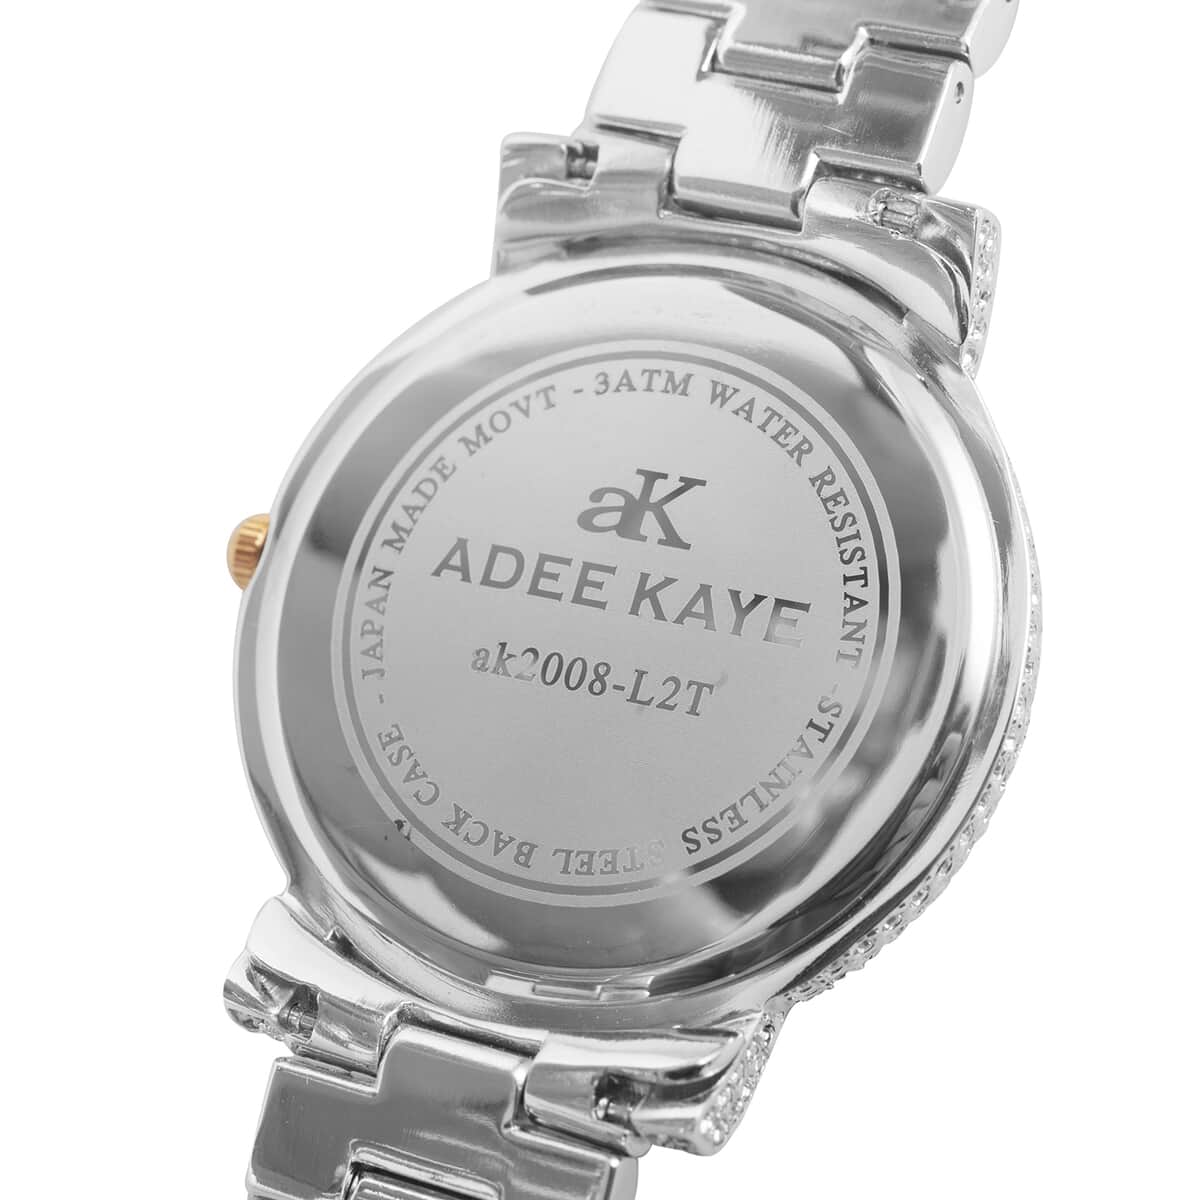 ADEE KAYE Austrian Crystal Japan Quartz Movement Watch in ION Plated RG and Stainless Steel Strap (39 mm) | Best Watch for Women | Designer Women's Wrist Watch image number 4